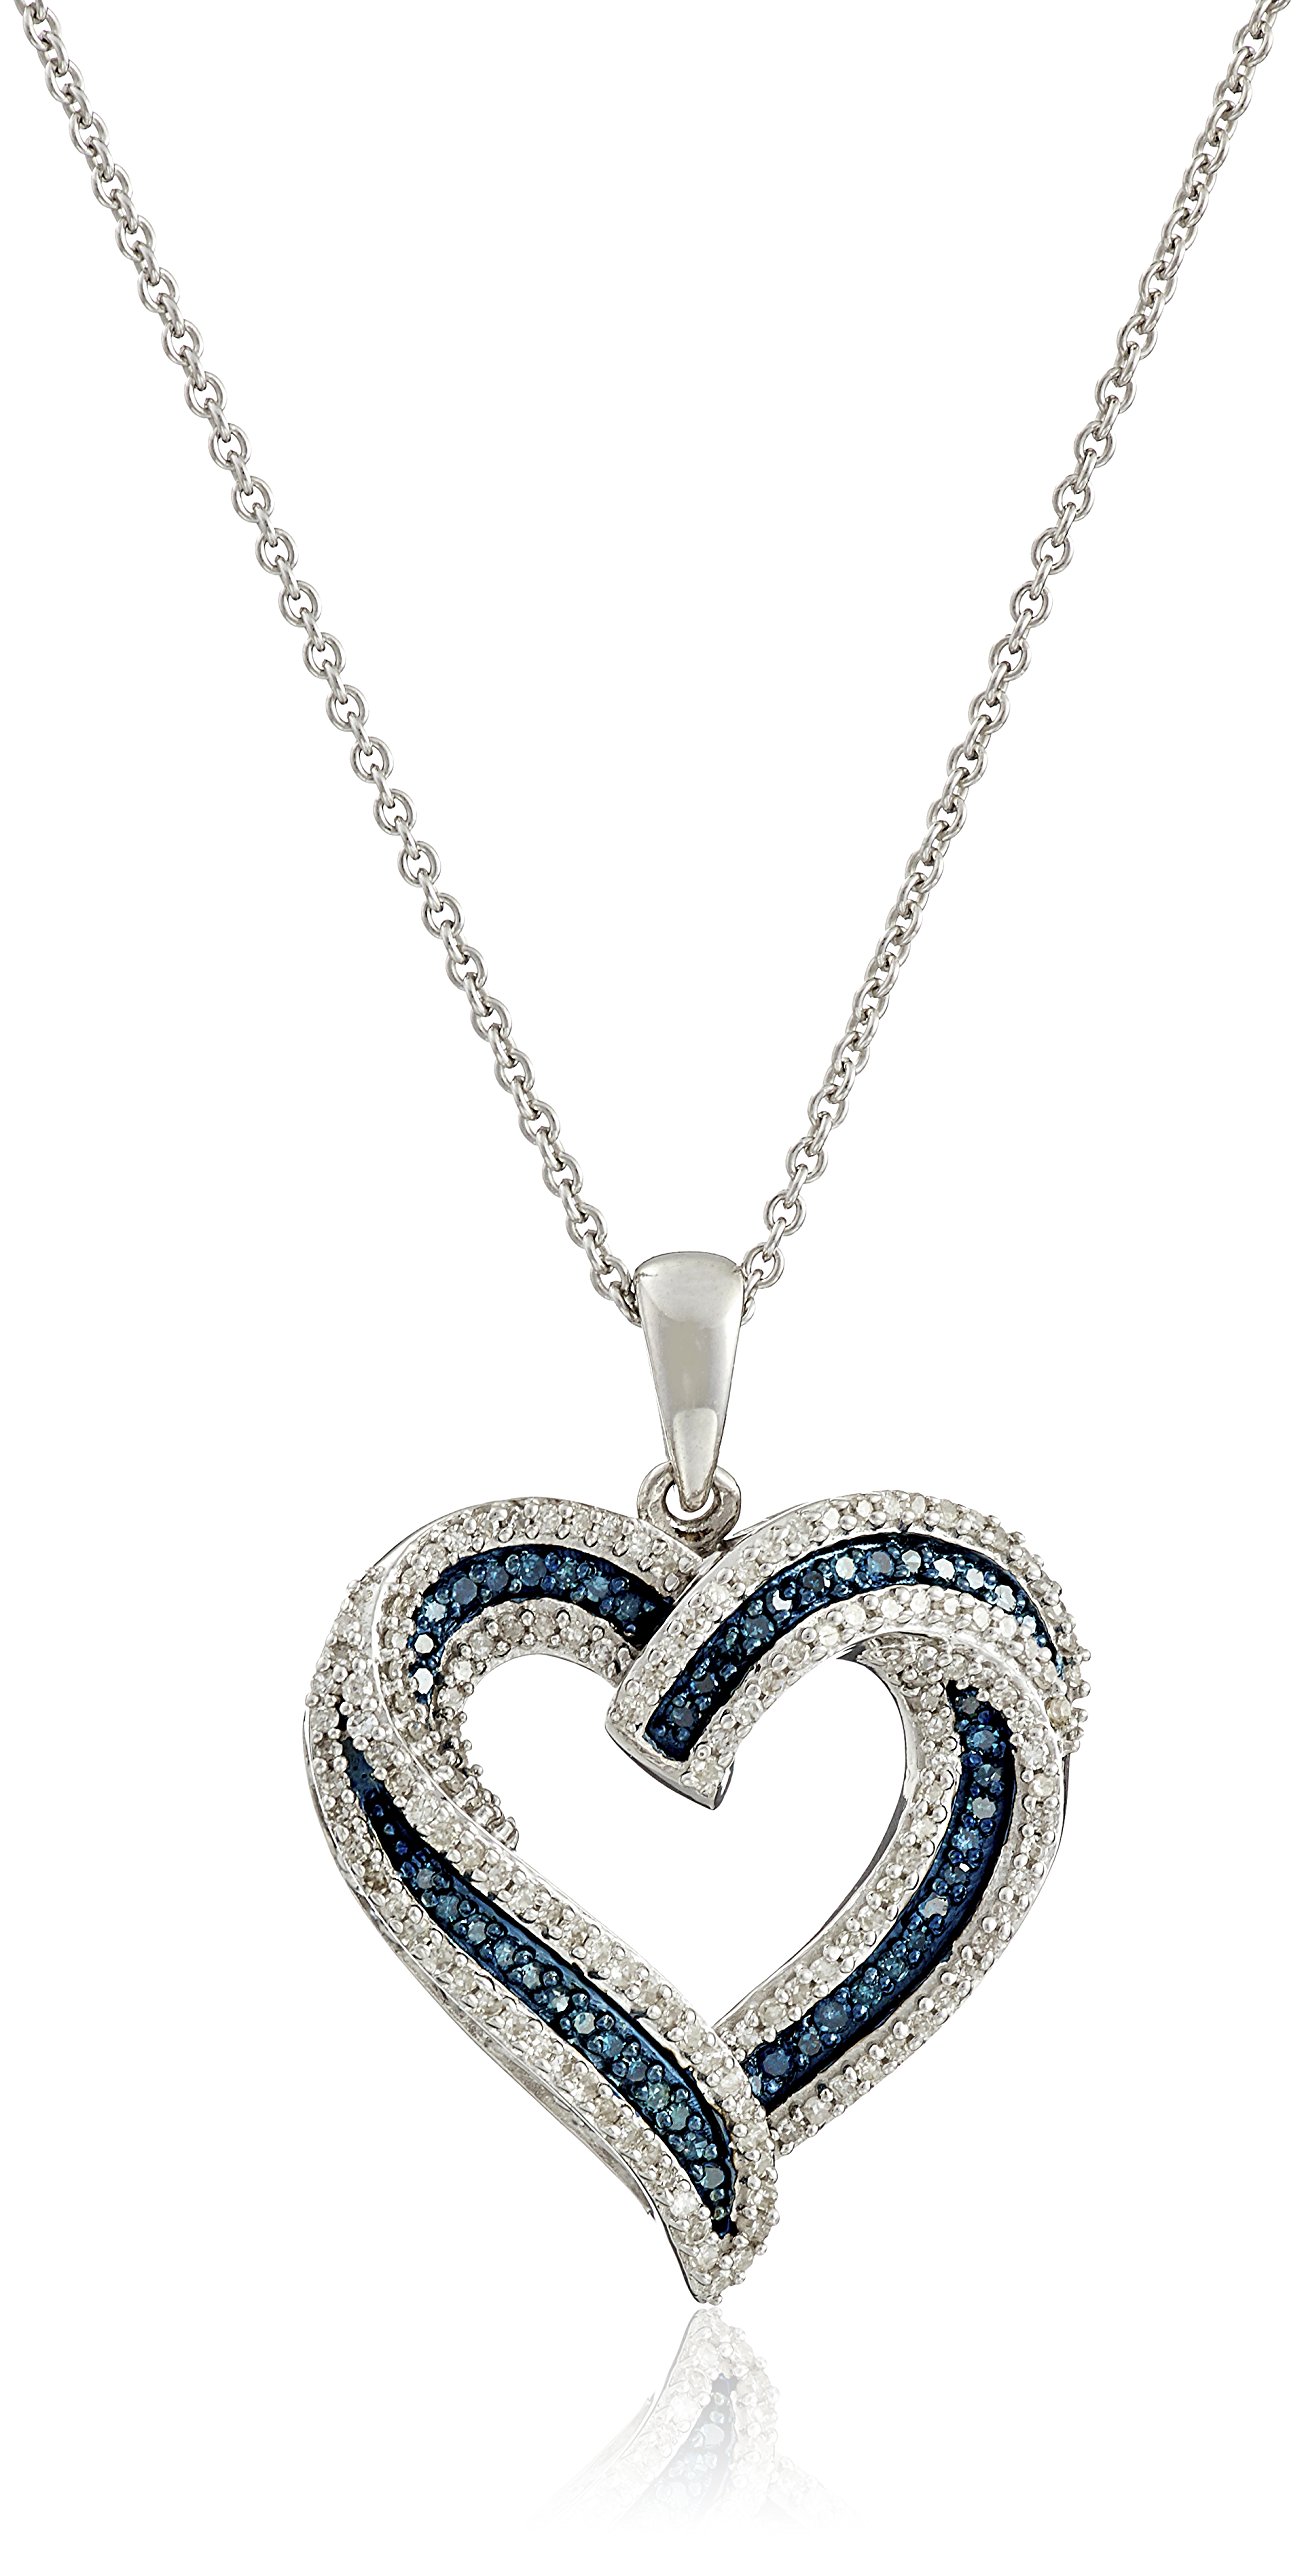 Amazon Collection Sterling Silver Blue and White Diamond Heart Pendant Necklace (1/2 cttw), 18